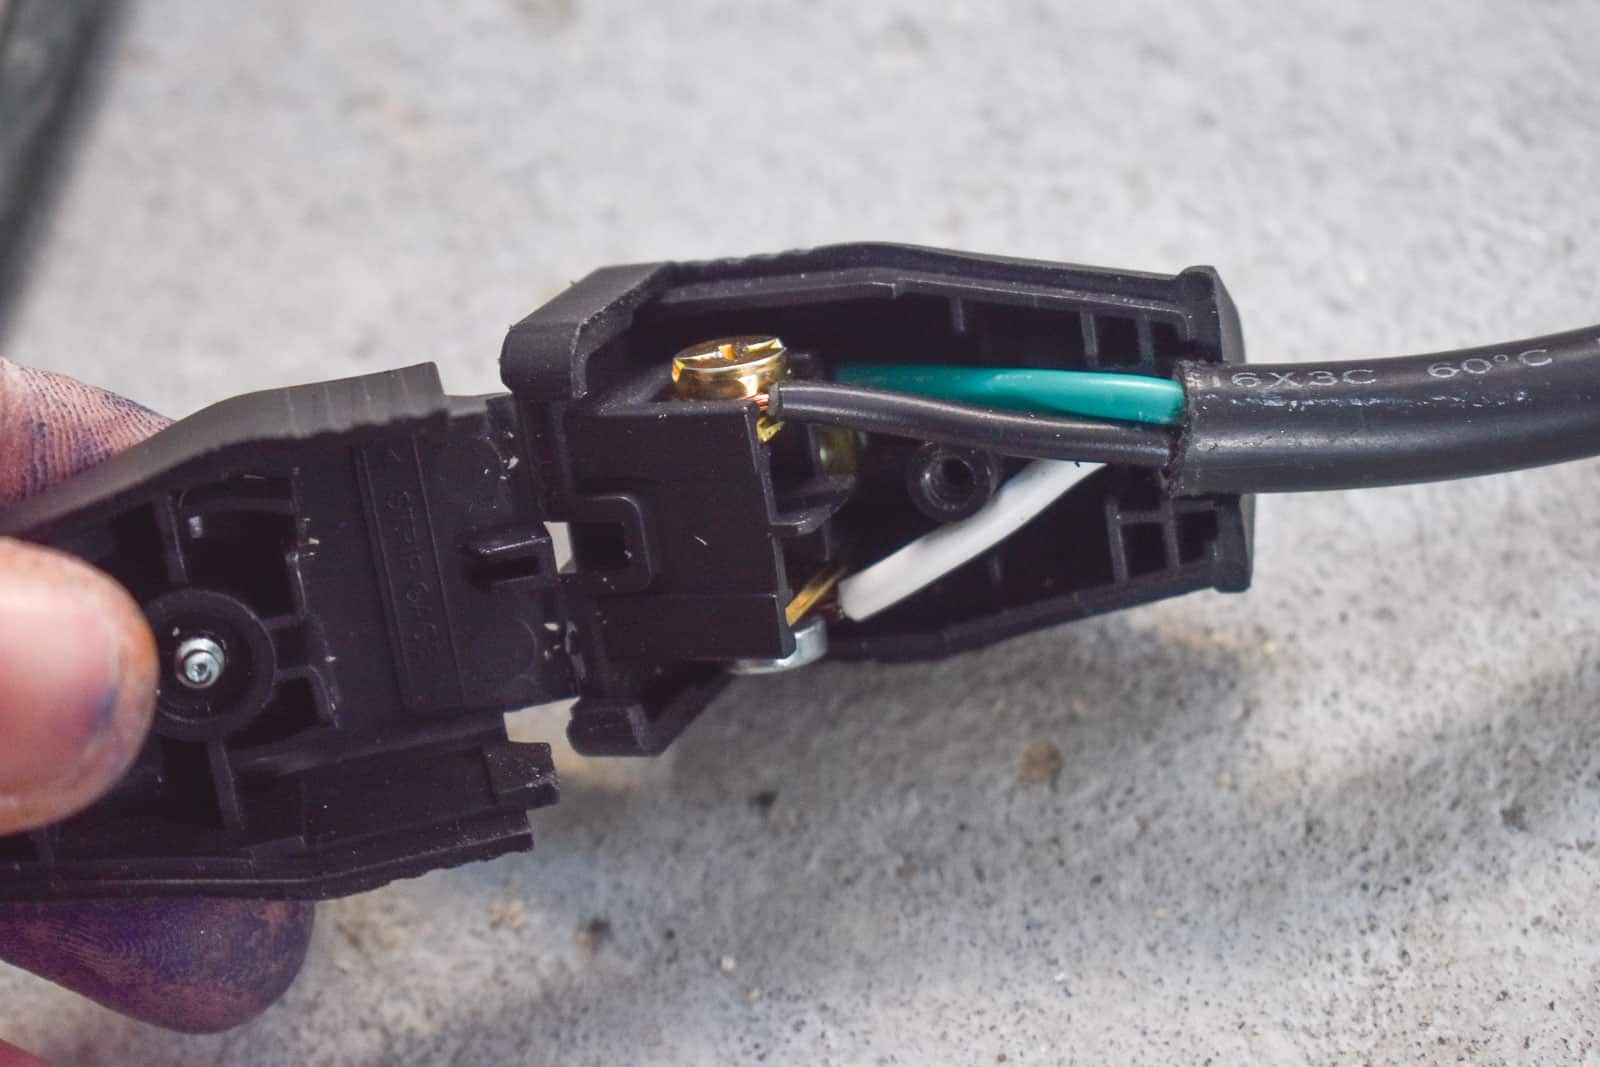 wrap the wires and wind around screws in plug